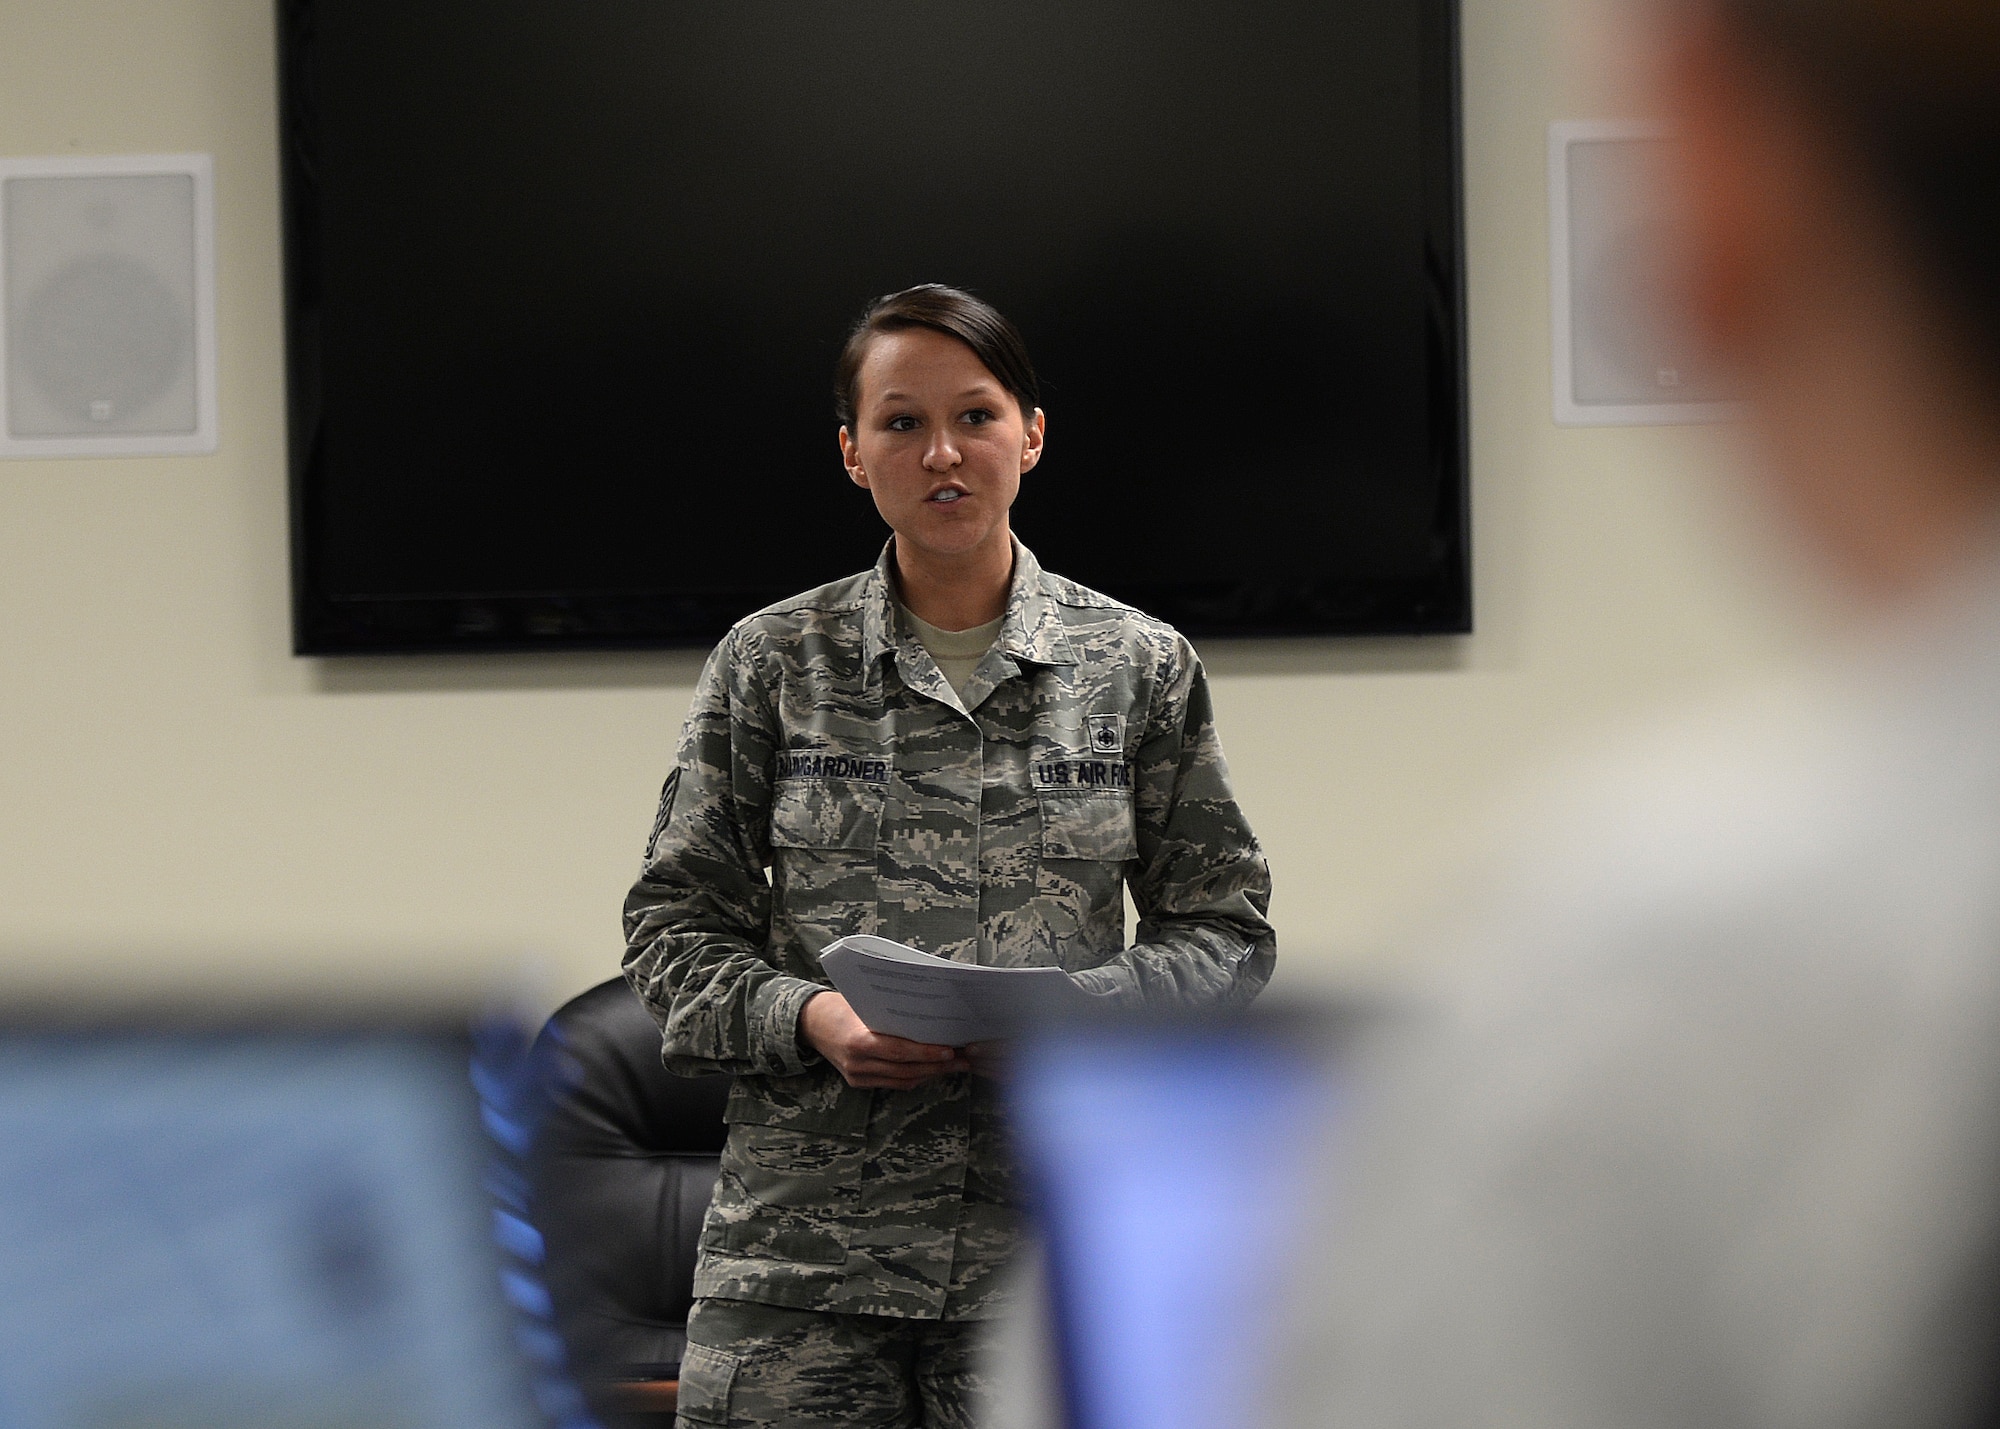 ALTUS AIR FORCE BASE, Okla. – U.S. Air Force Tech. Sgt. Cristy Baumgardner, 97th Force Support Squadron Airman Leadership School instructor, speaks to students during a lecture in an ALS classroom Jan. 28, 2014. During the five-week class, Senior Airmen learn to become effective leaders, supervising Airmen and becoming better communicators. (U.S. Air Force photo by Senior Airman Levin Boland/Released)